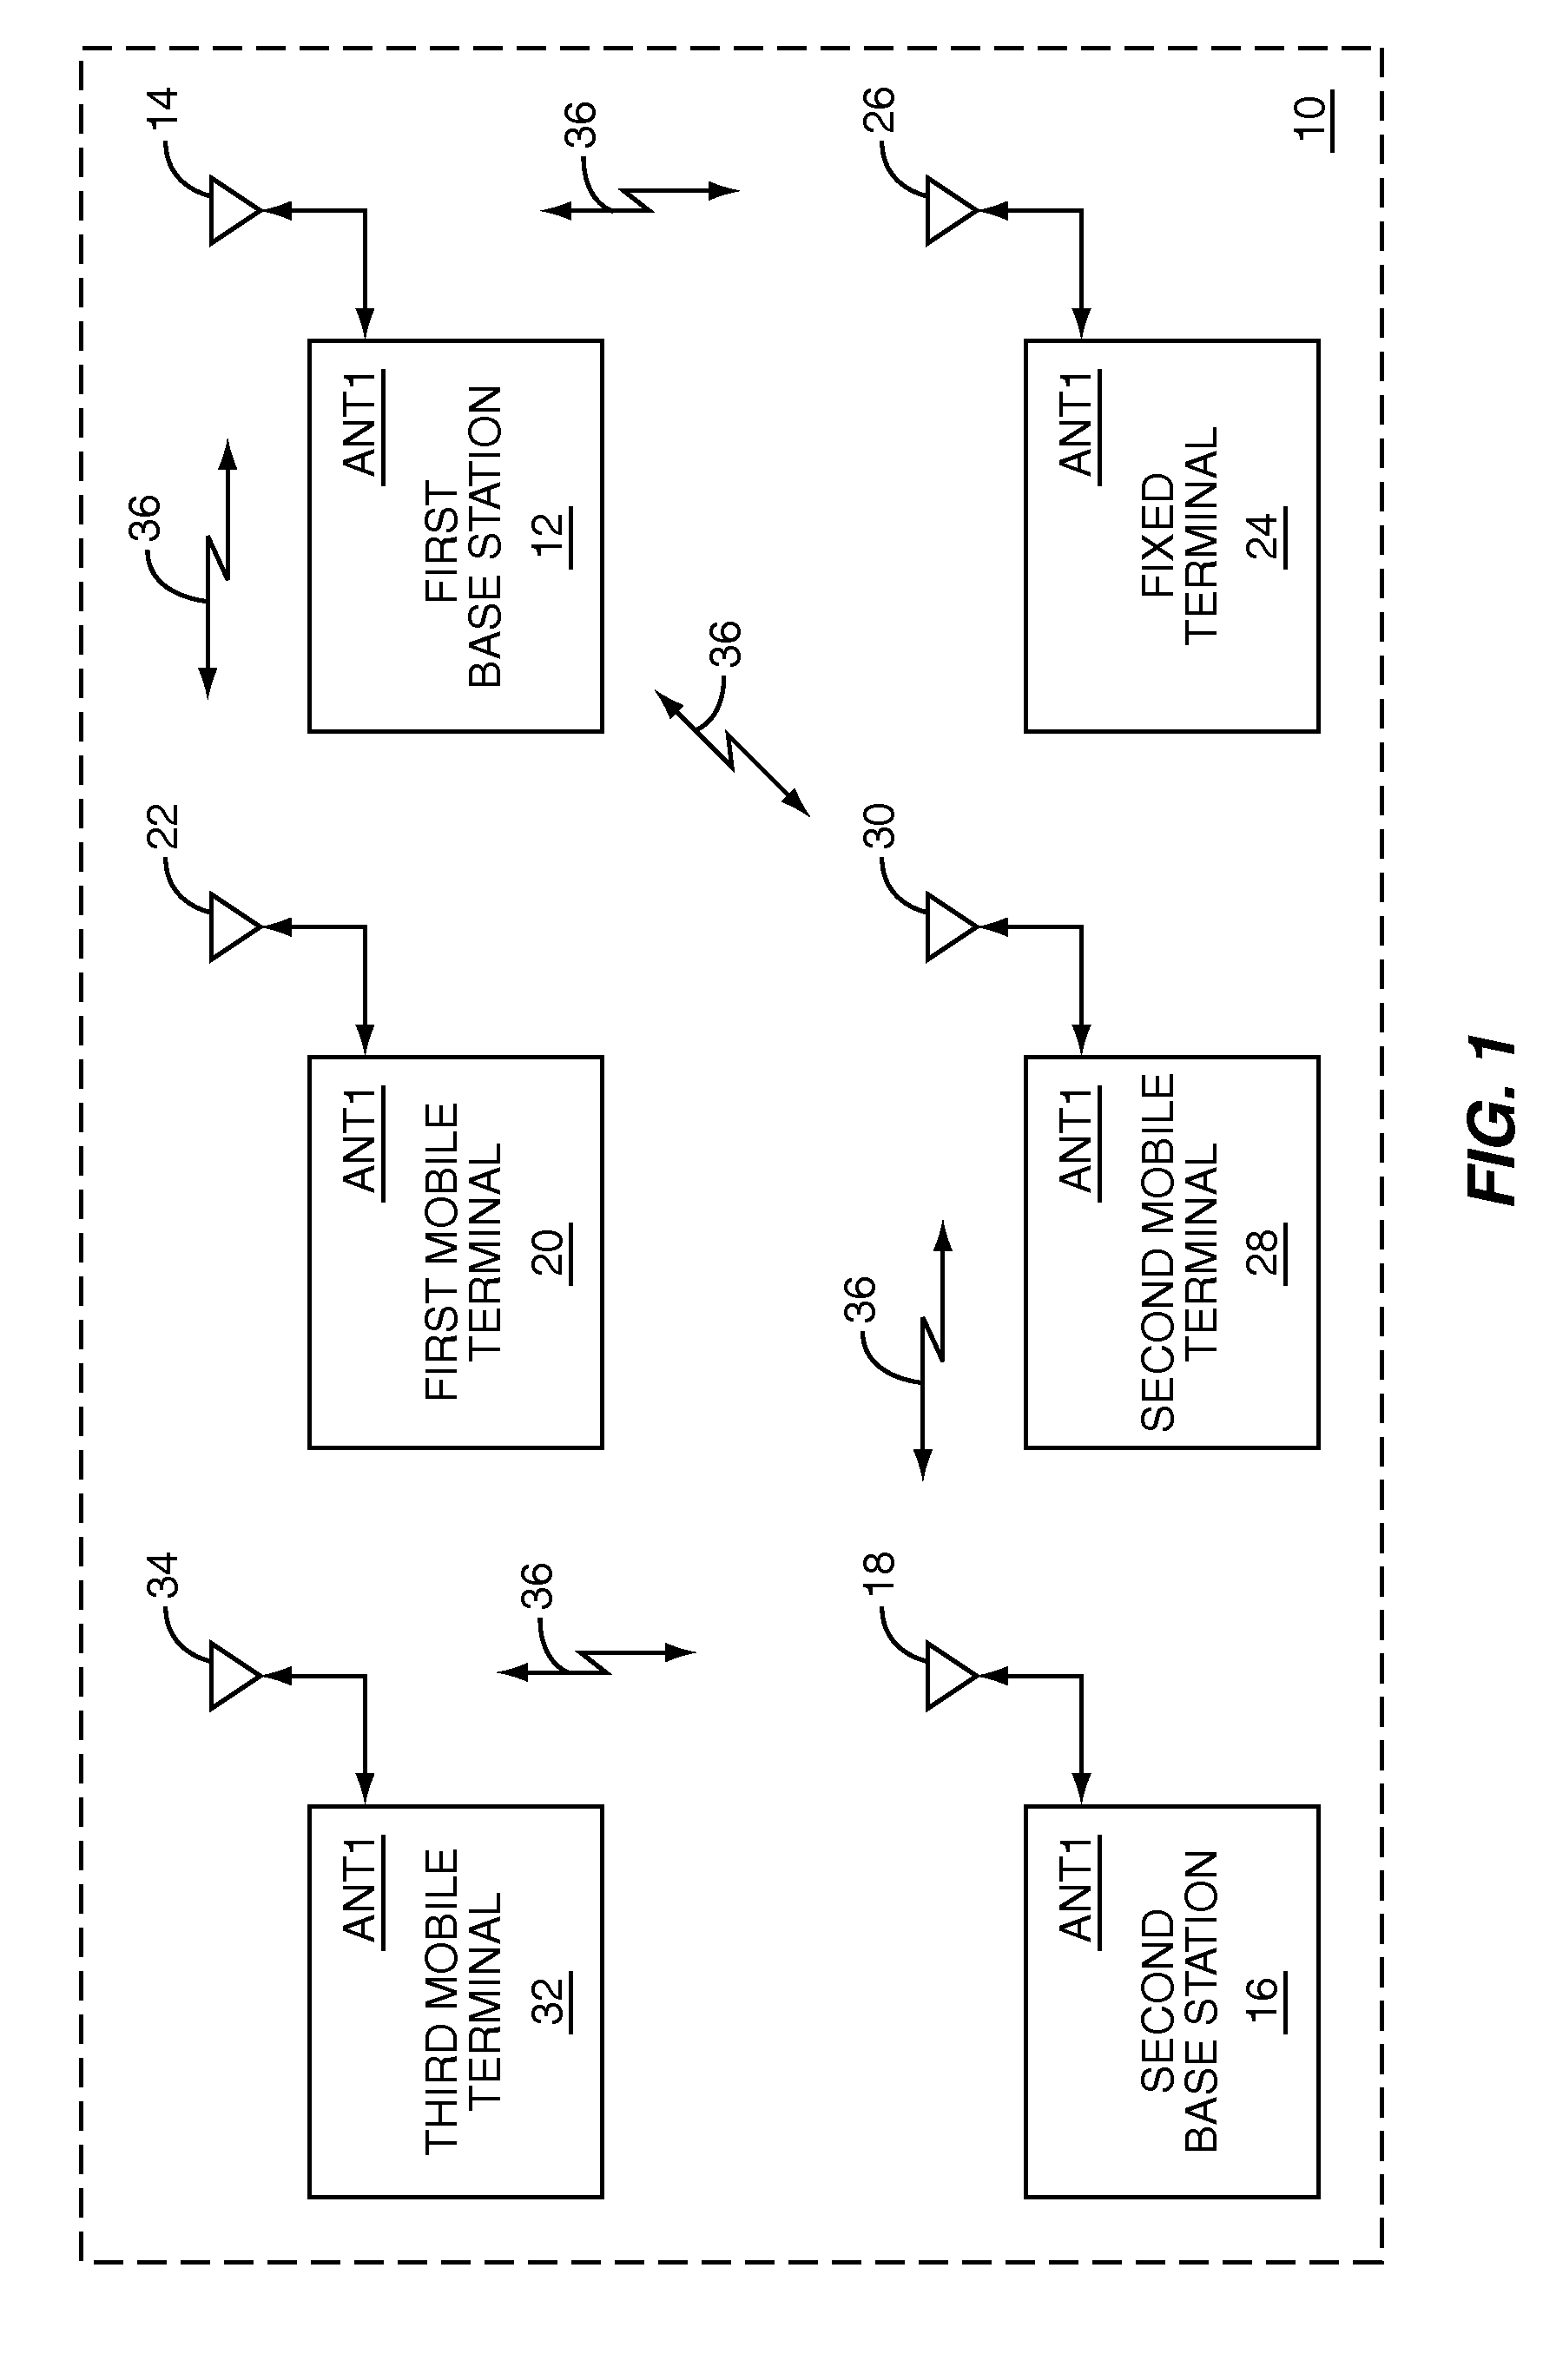 Content differentiated hierarchical modulation used in radio frequency communications